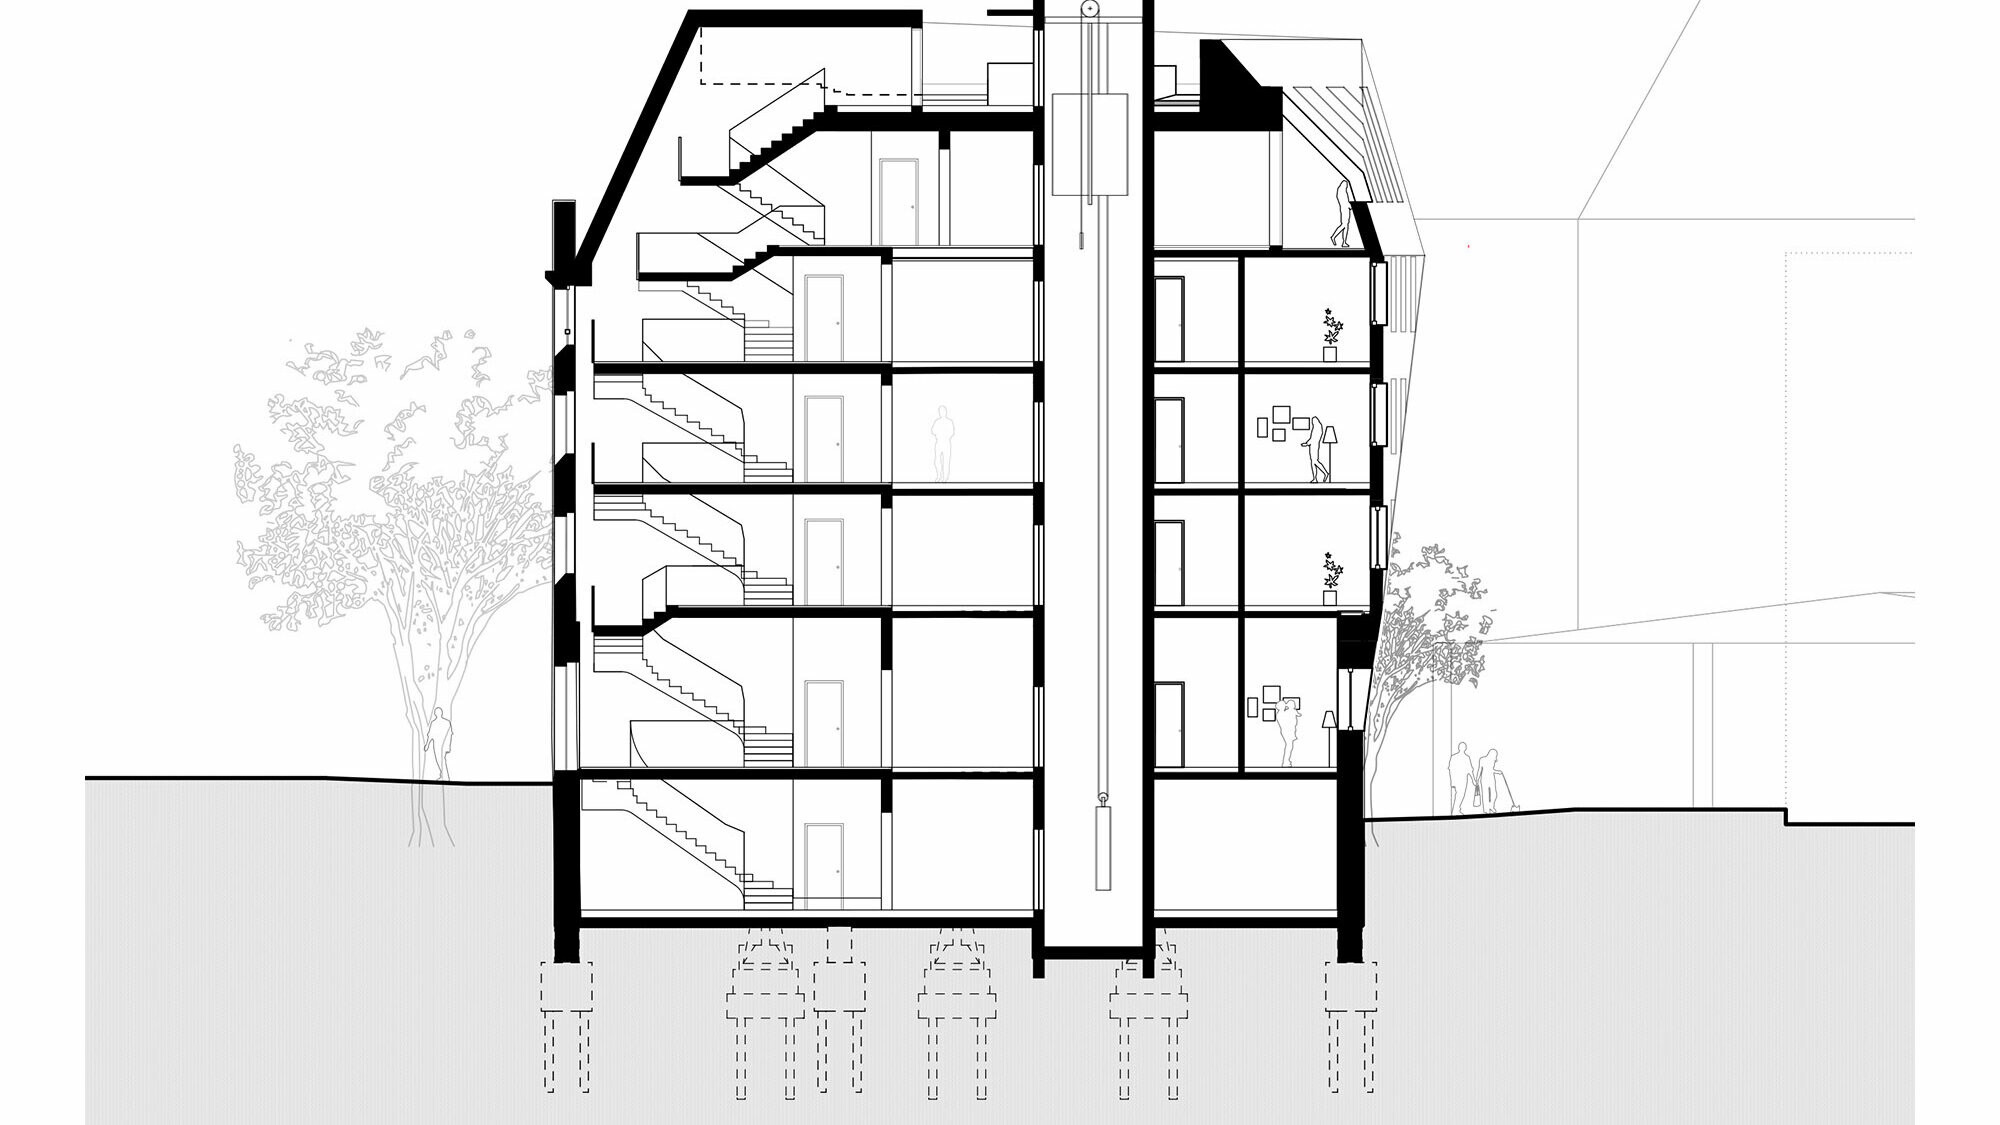 Cross-section of the student residence "The Station".